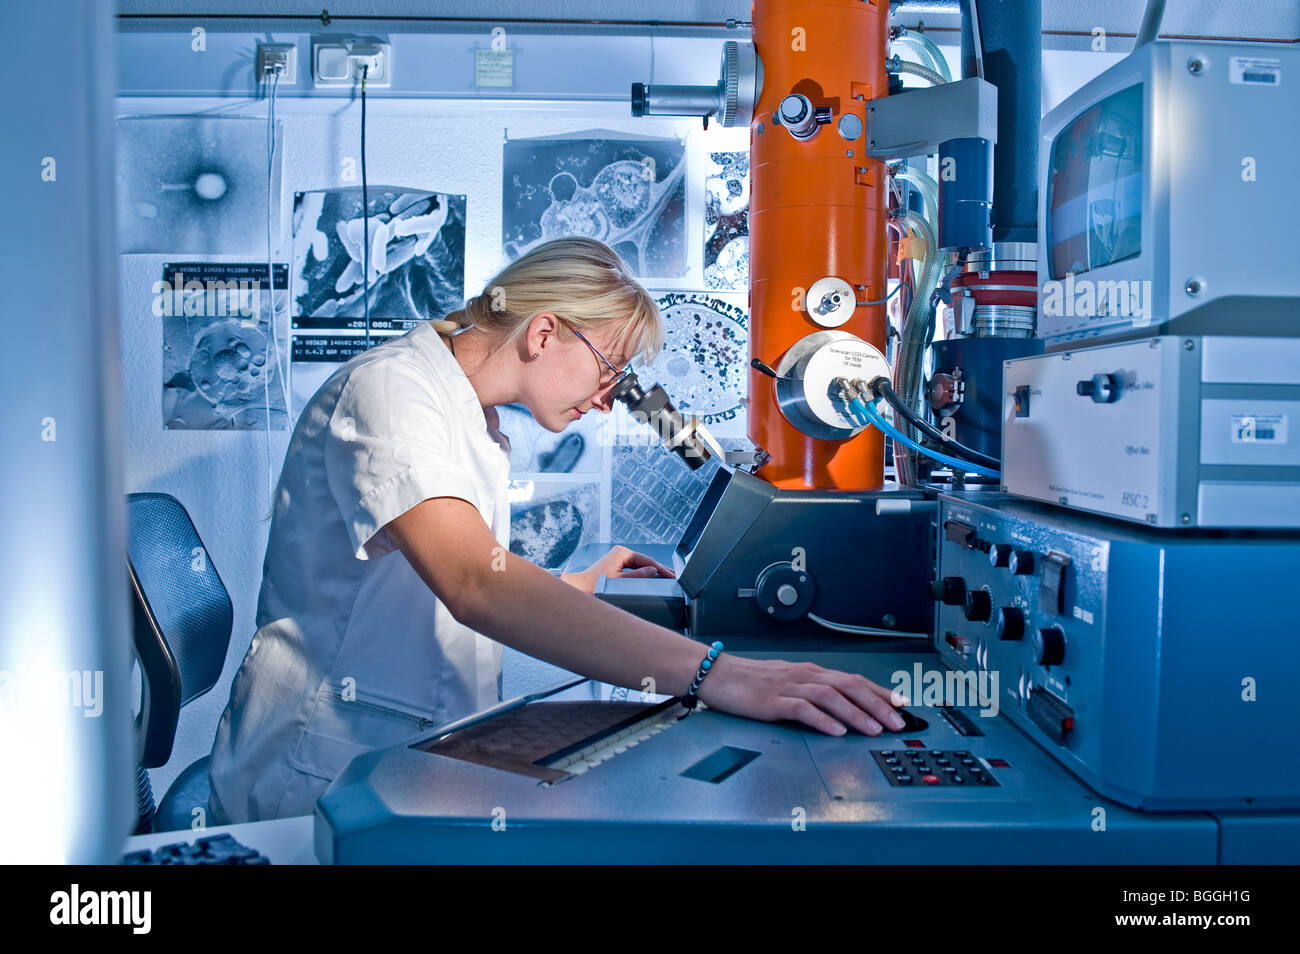 Laboratory technician working on an electron microscope Max-Planck research;Fermentation protein folding; Halle Germany Europe Stock Photo